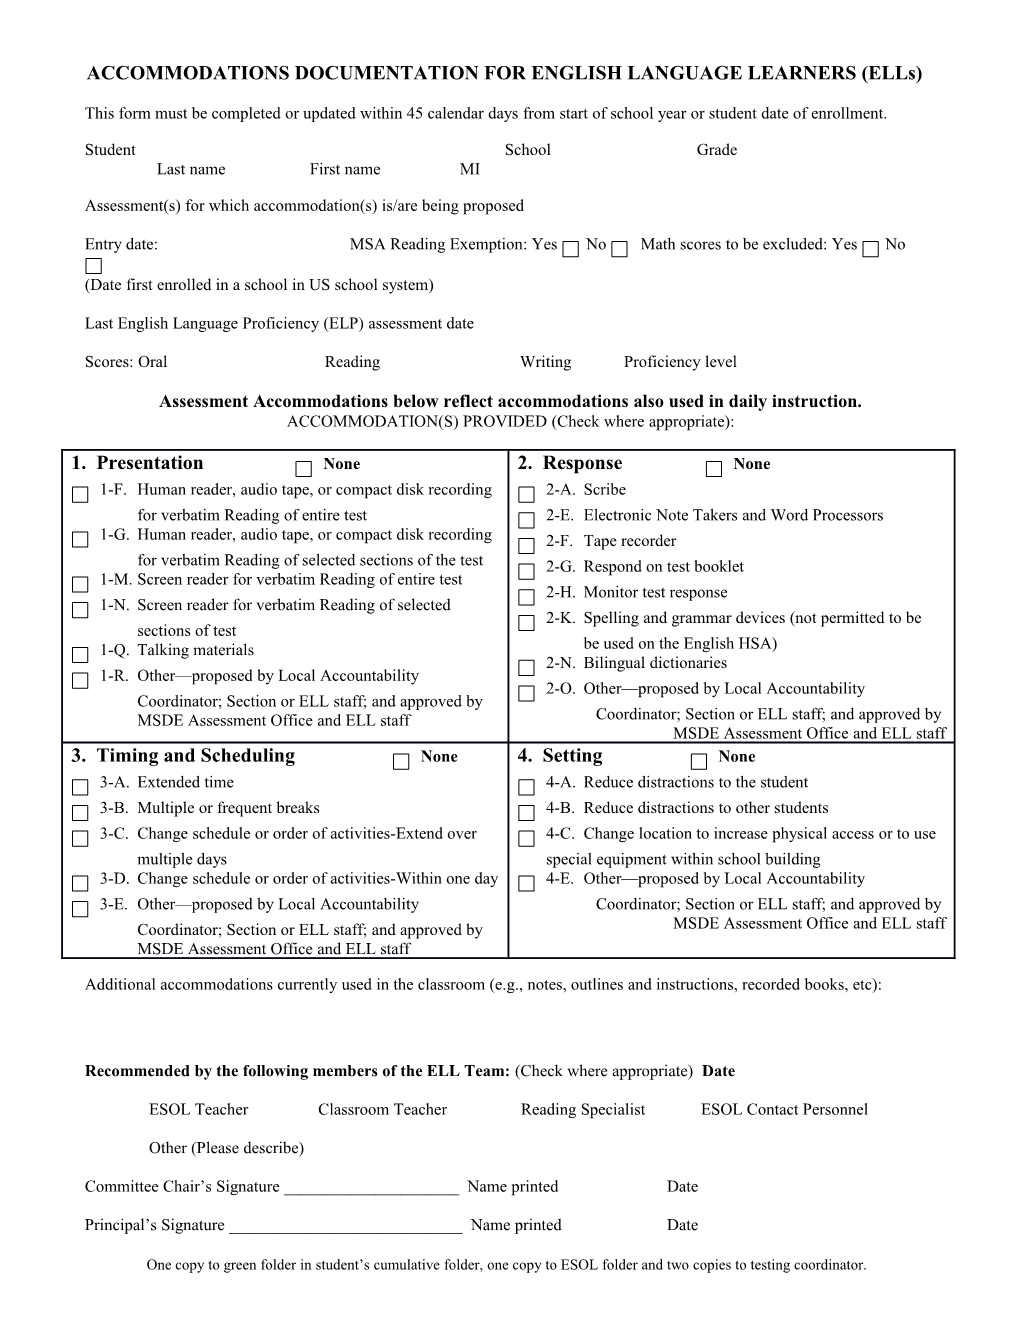 Accommodations Documentation for English Language Learner (Ell) Students